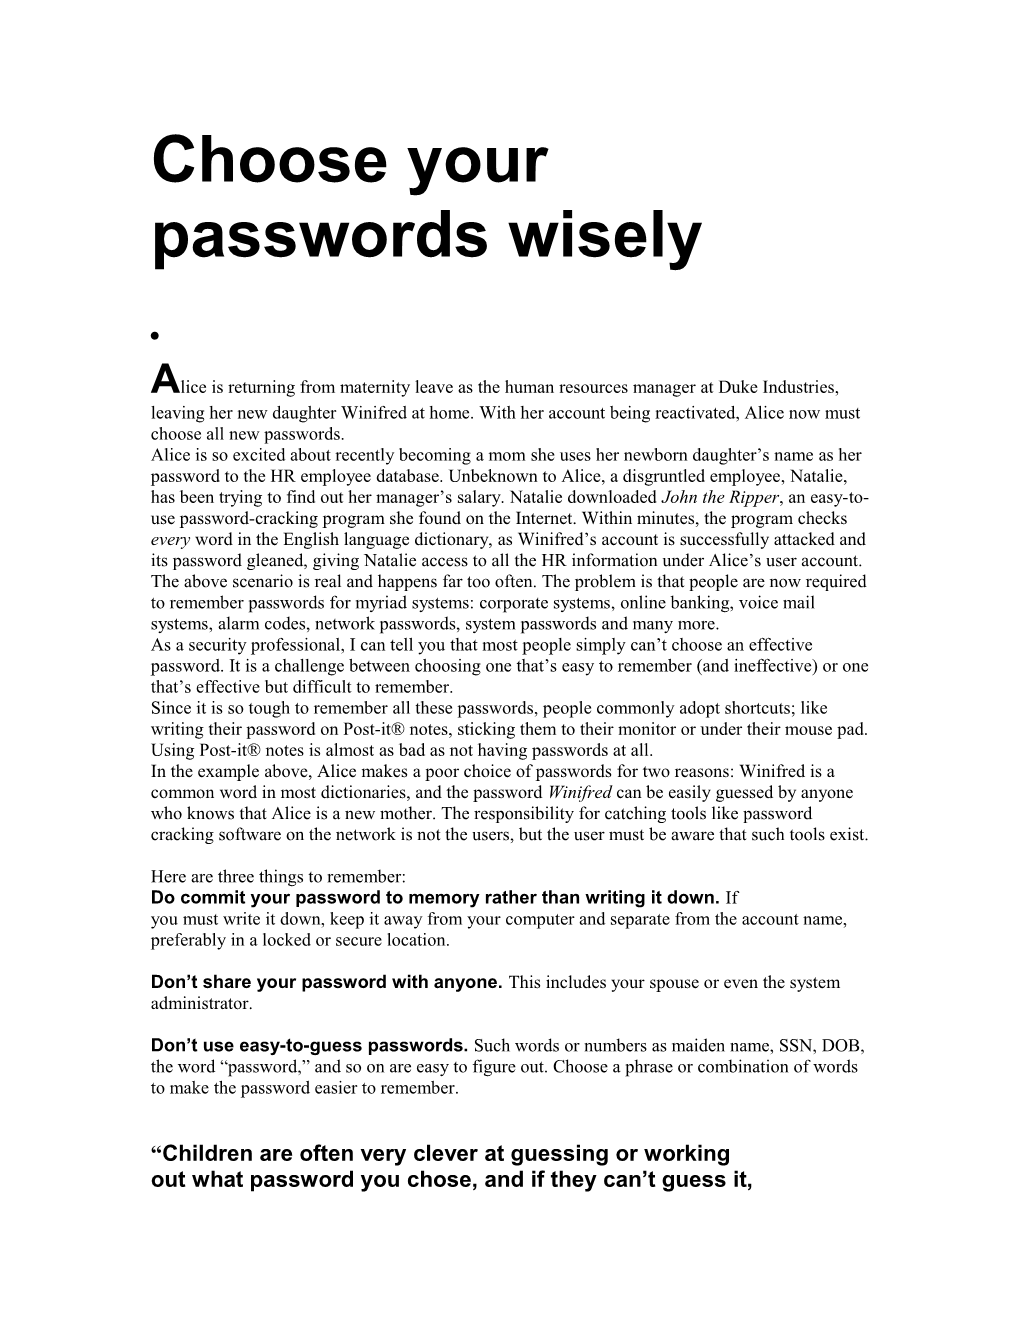 Passwords Wisely